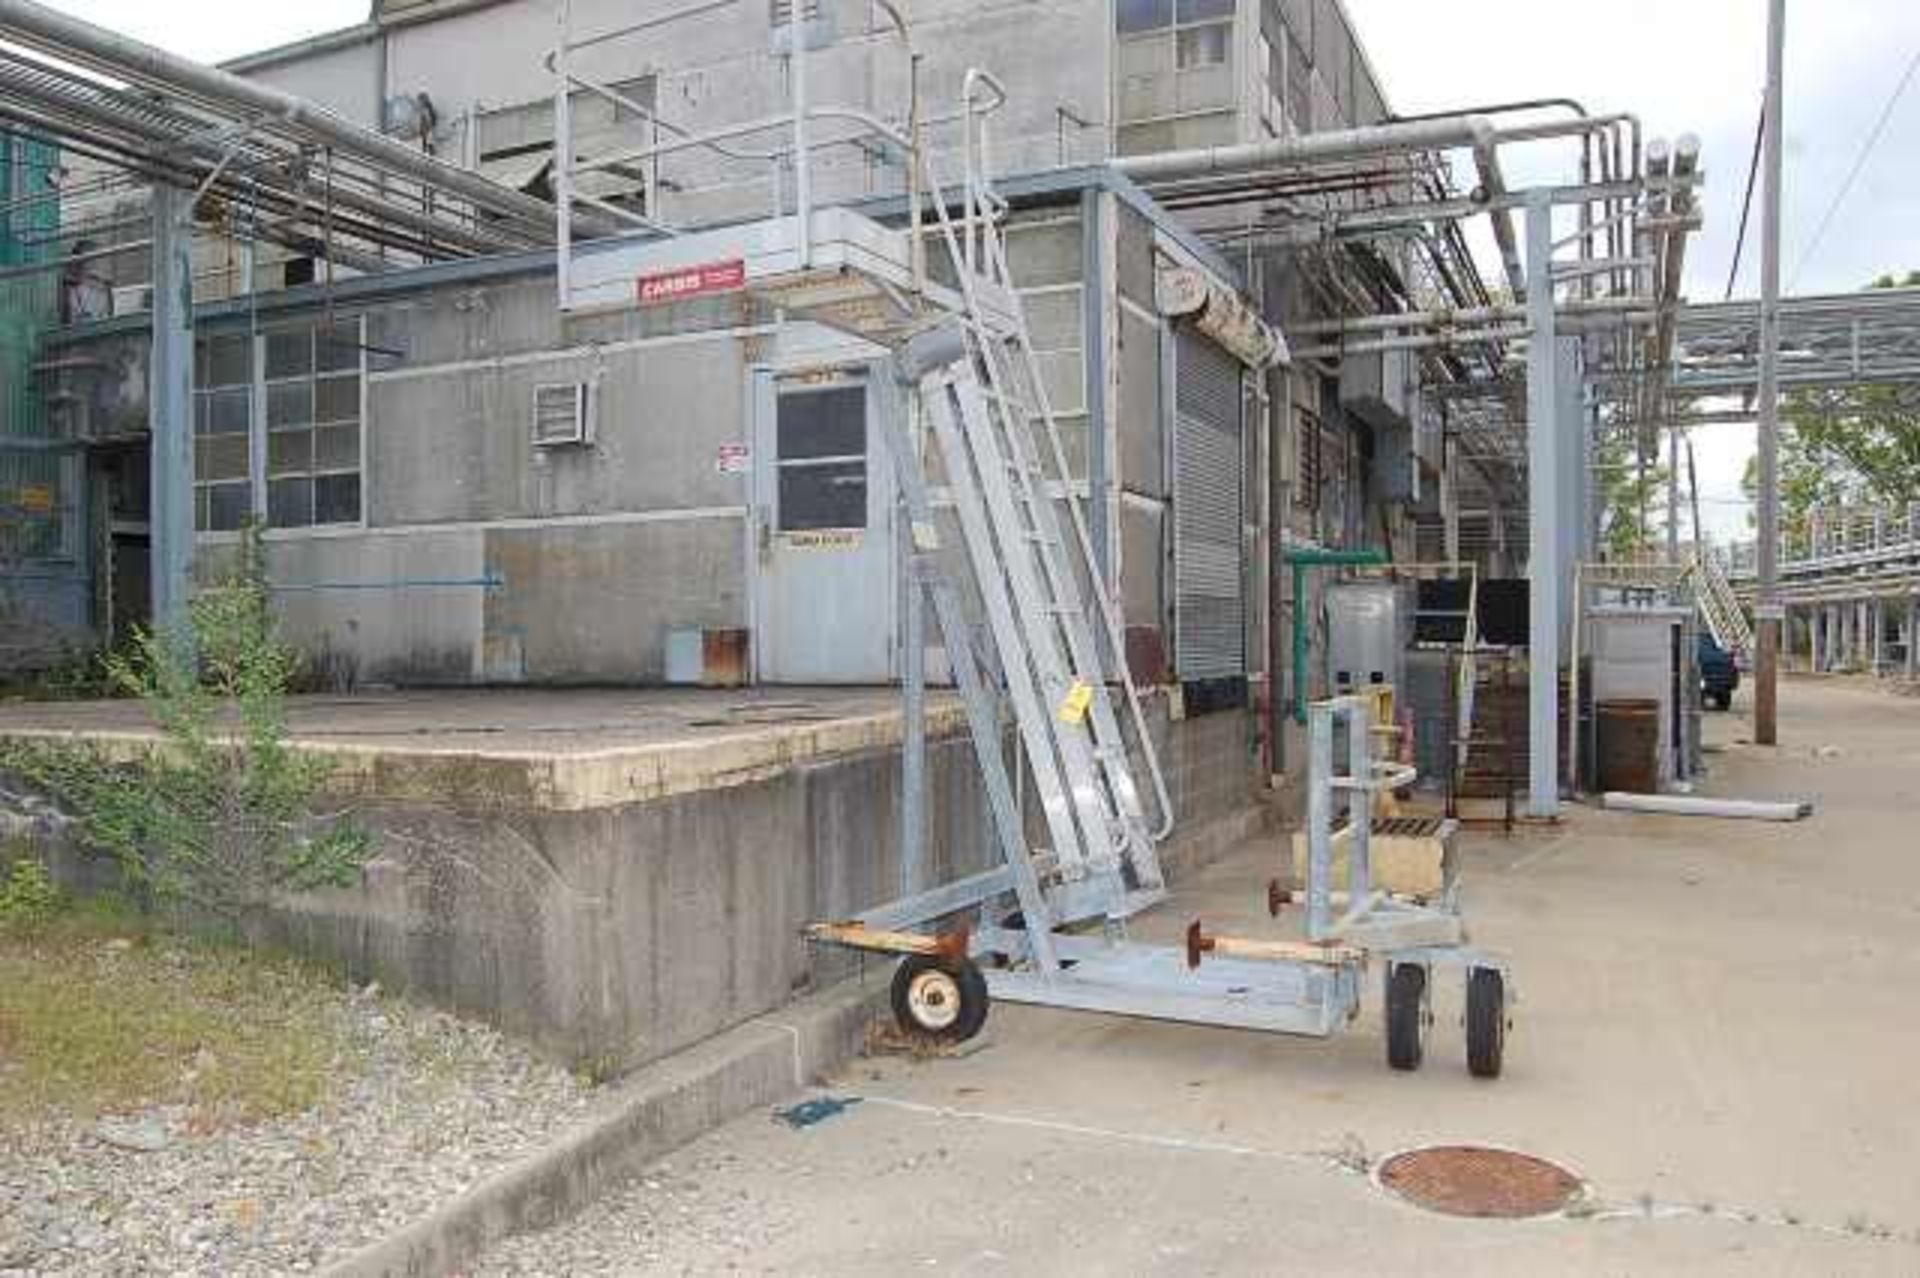 Carbis Manual Operated Manlift, Air Tires, Ladder Extension